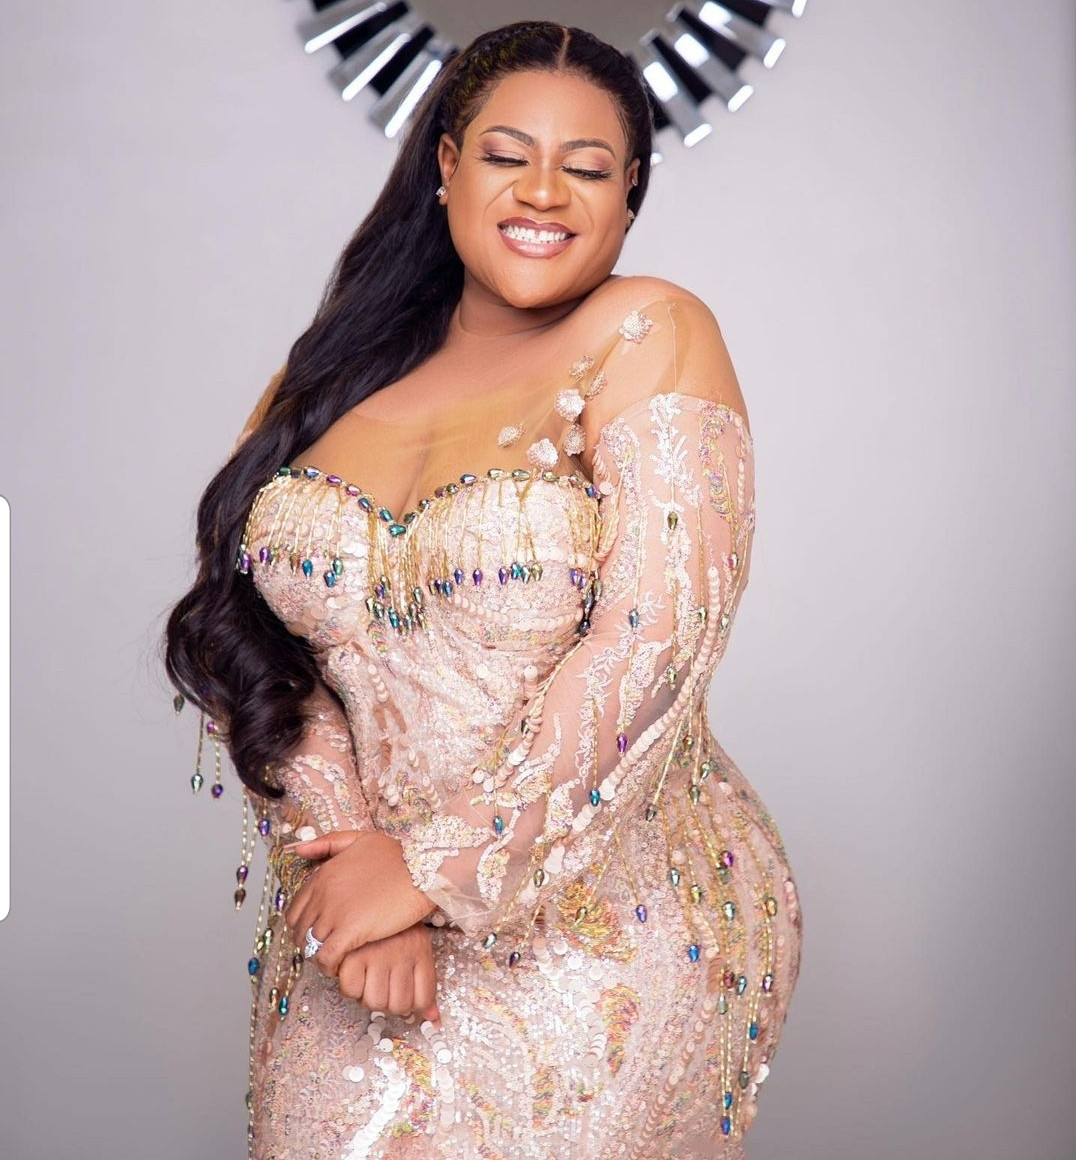 Actress Nkechi Blessing reveals how she'll buy man, marry him and totally control him